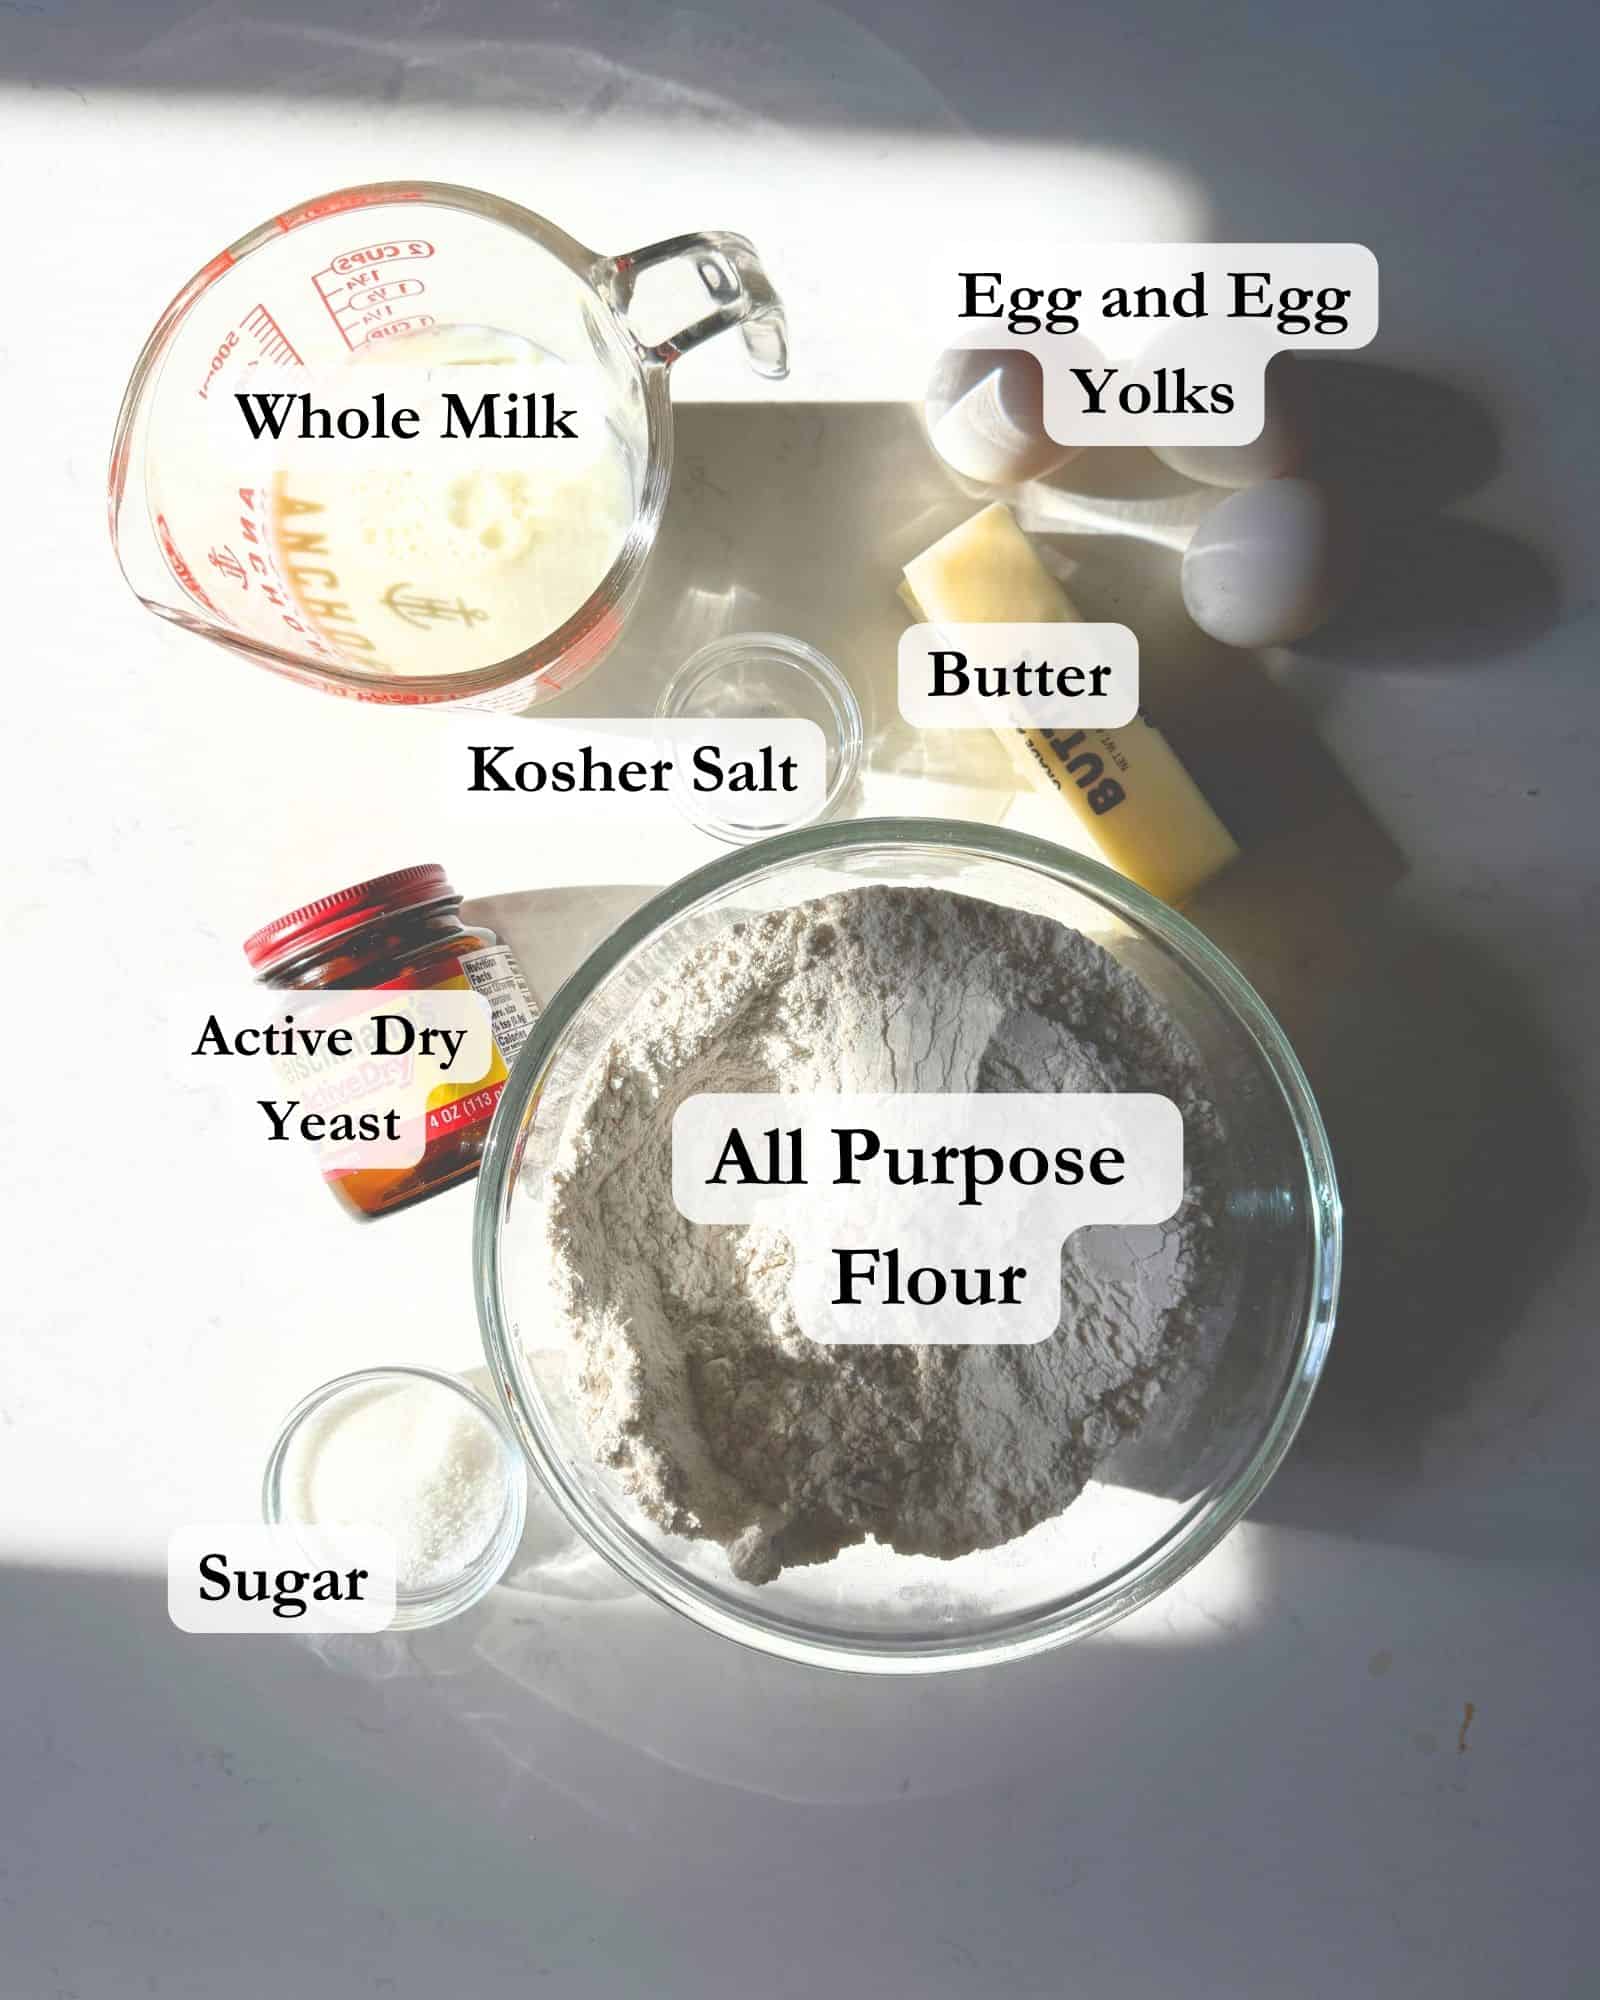 ingredients to make brown and serve dinner rolls - flour, butter, sugar, yeast, salt, eggs, and egg yolks.